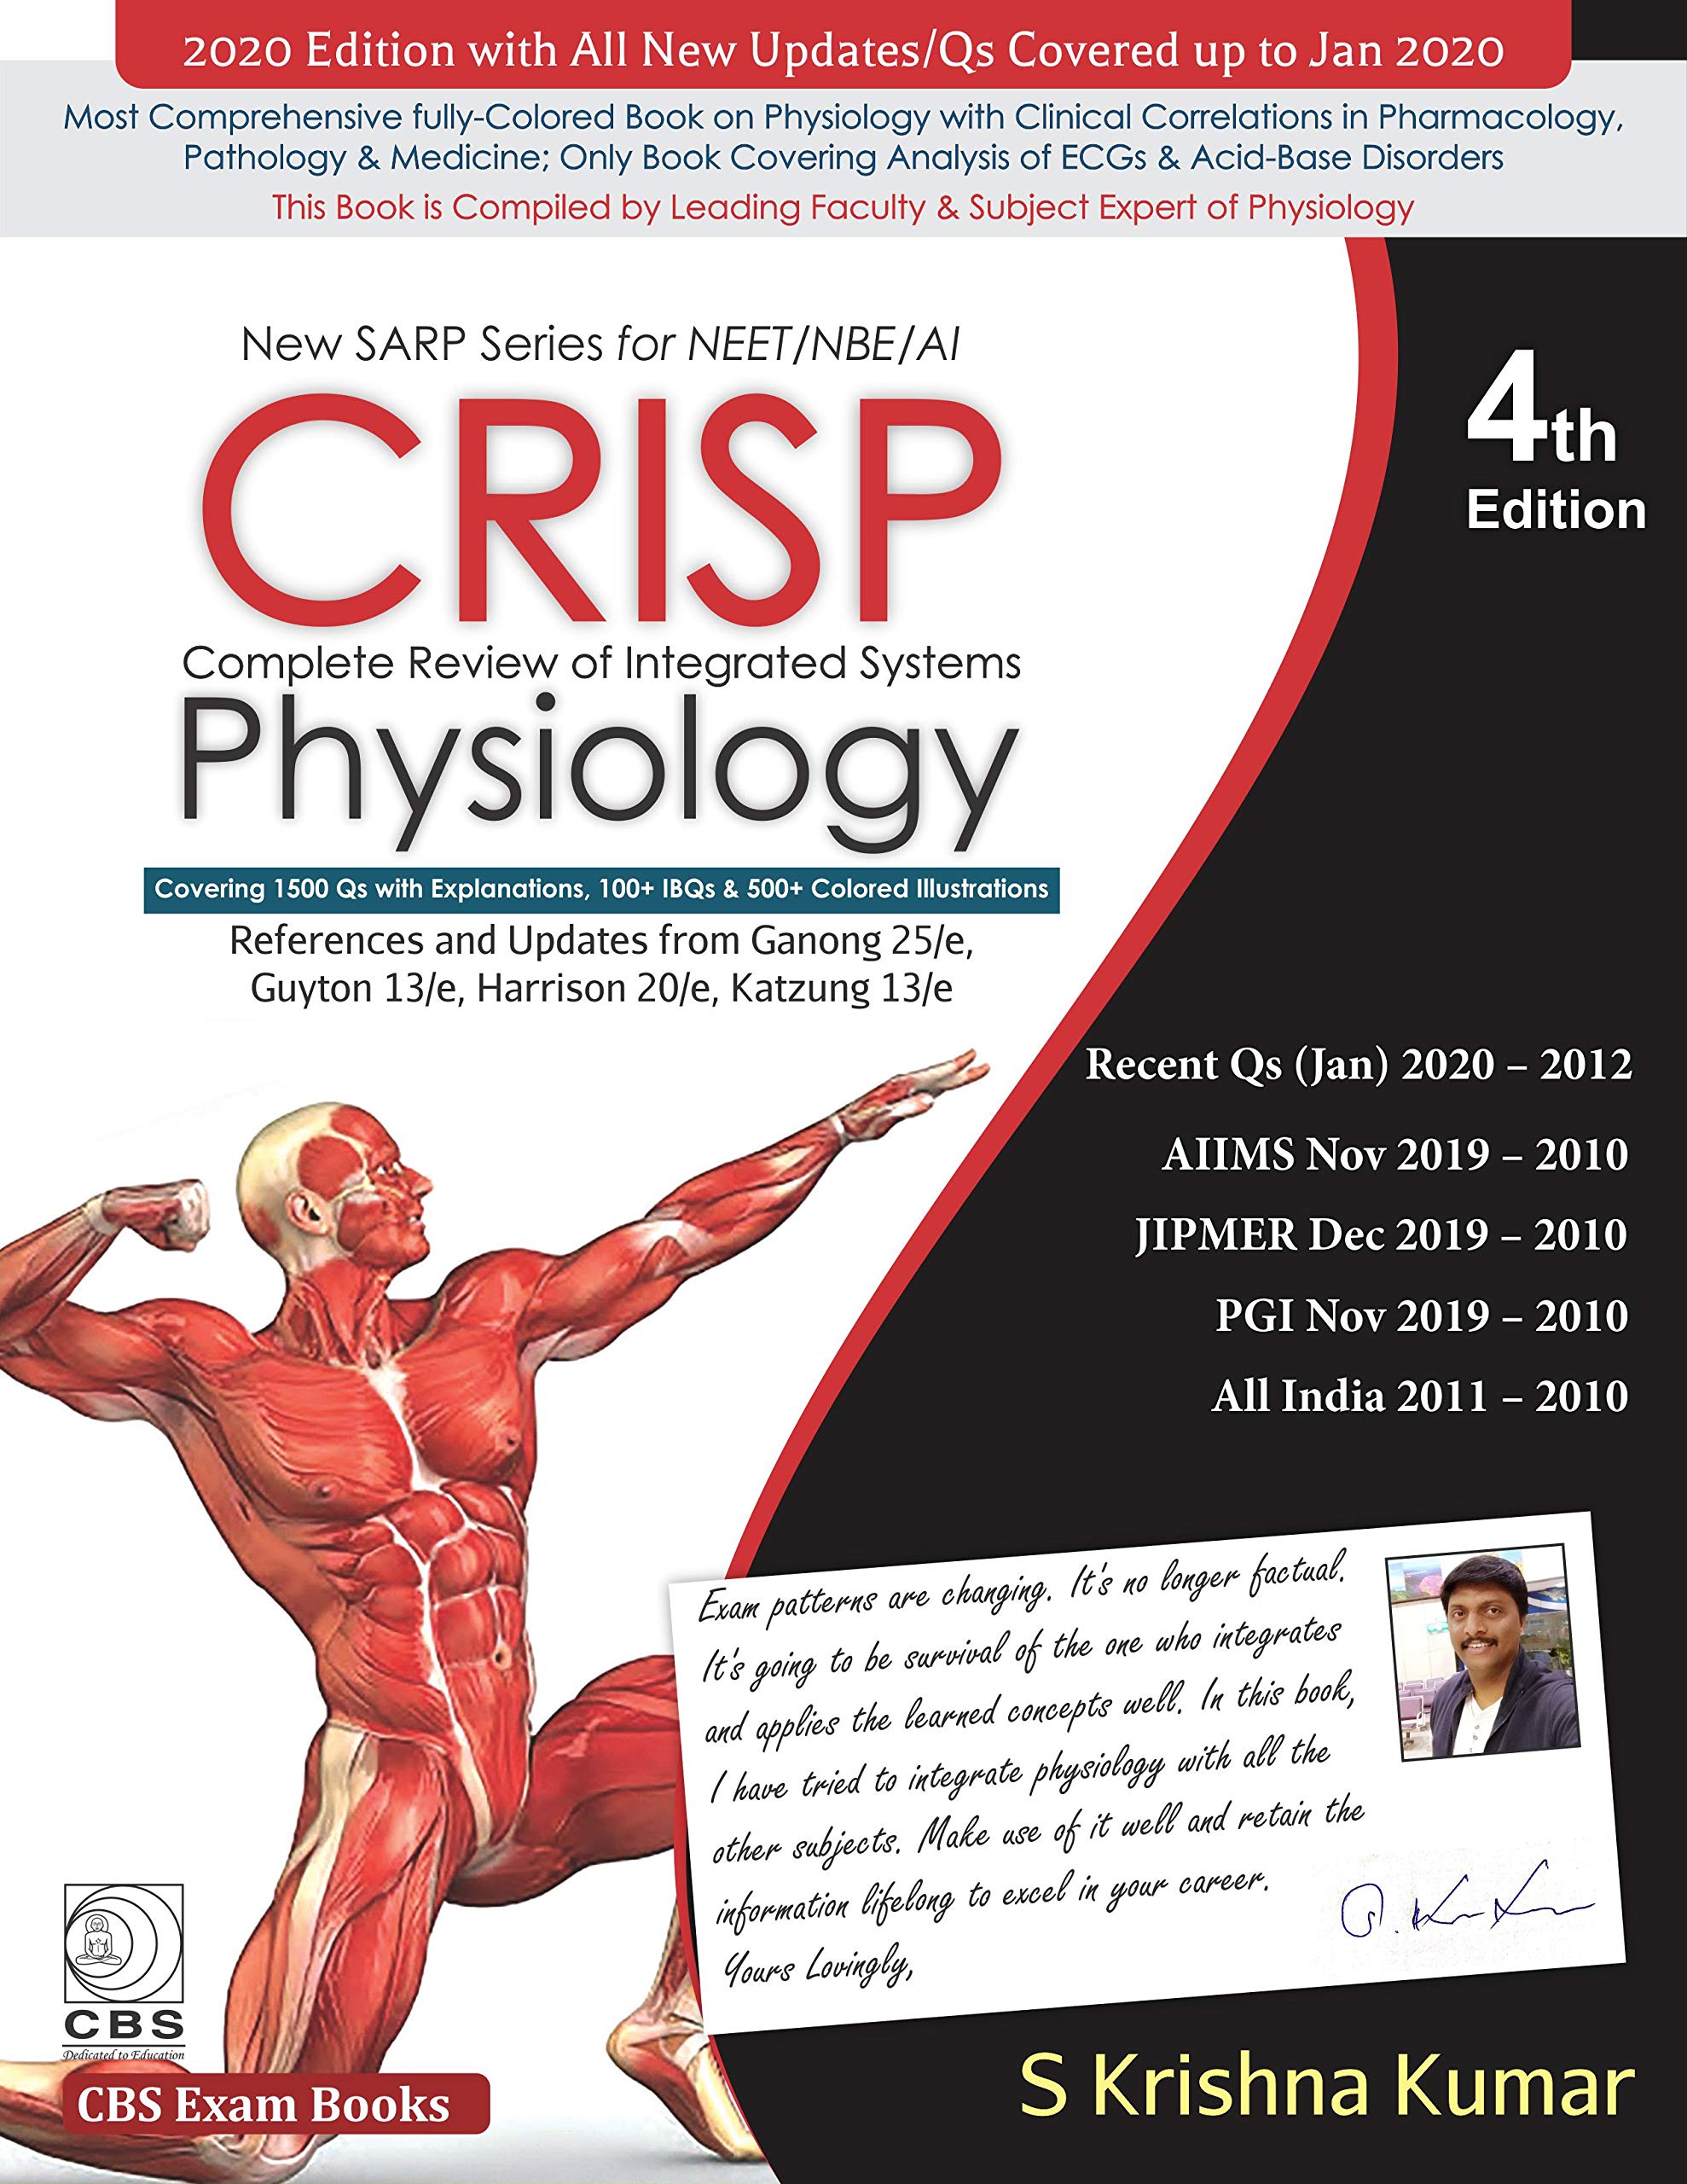 New Sarp Series For Neet/Nbe/Al CRISP Complete Review Of Integrated Systems Physiology, 4E (Pb)